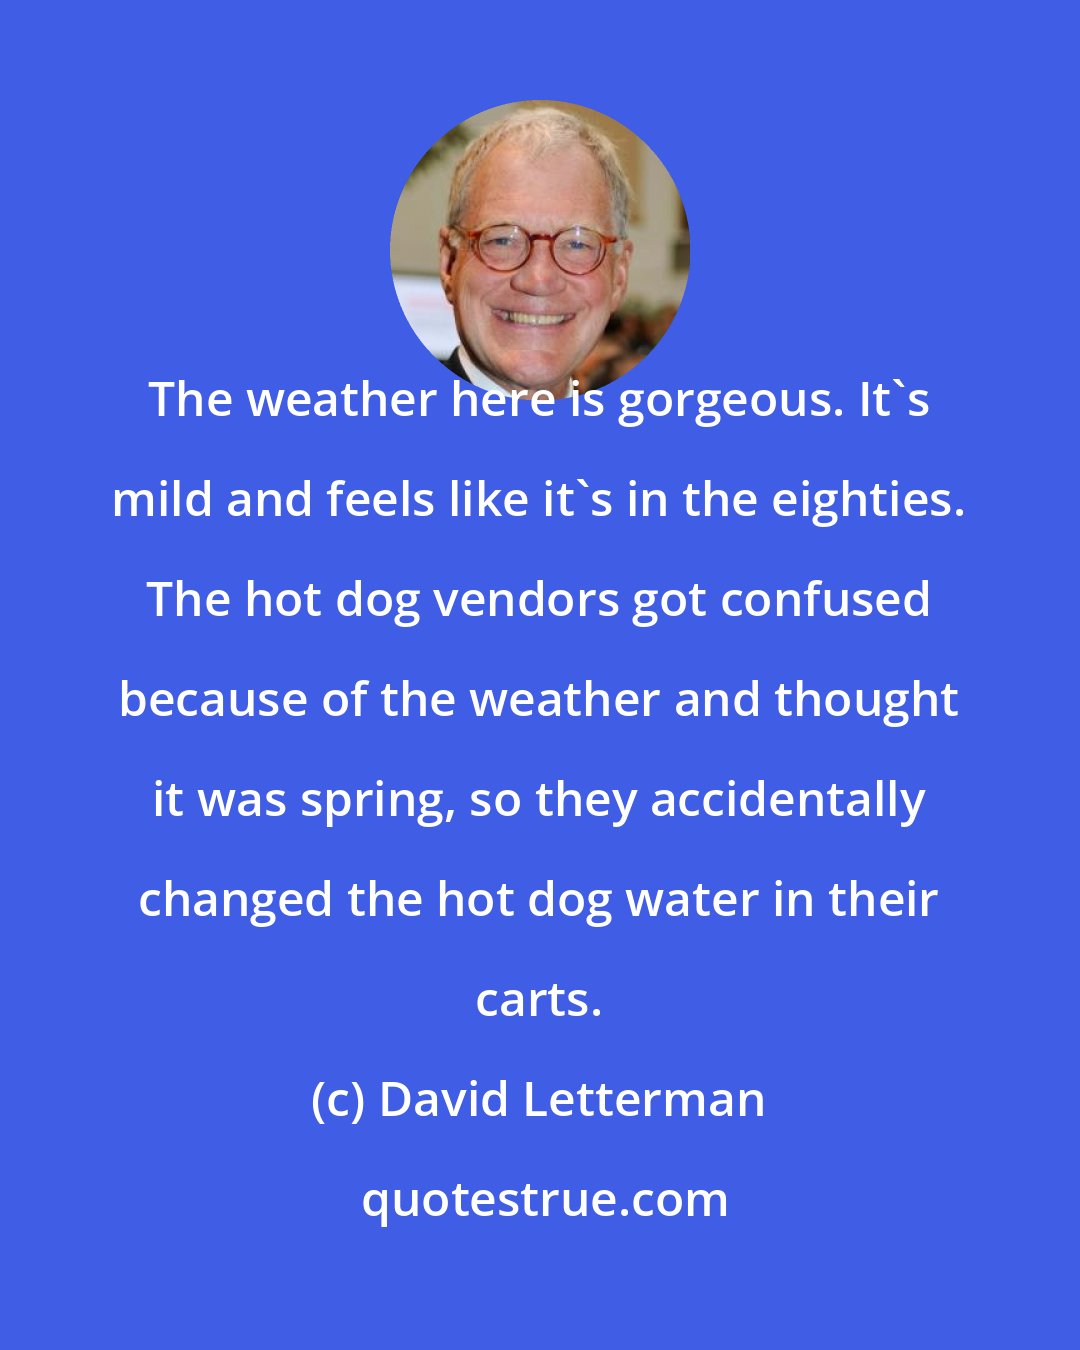 David Letterman: The weather here is gorgeous. It's mild and feels like it's in the eighties. The hot dog vendors got confused because of the weather and thought it was spring, so they accidentally changed the hot dog water in their carts.